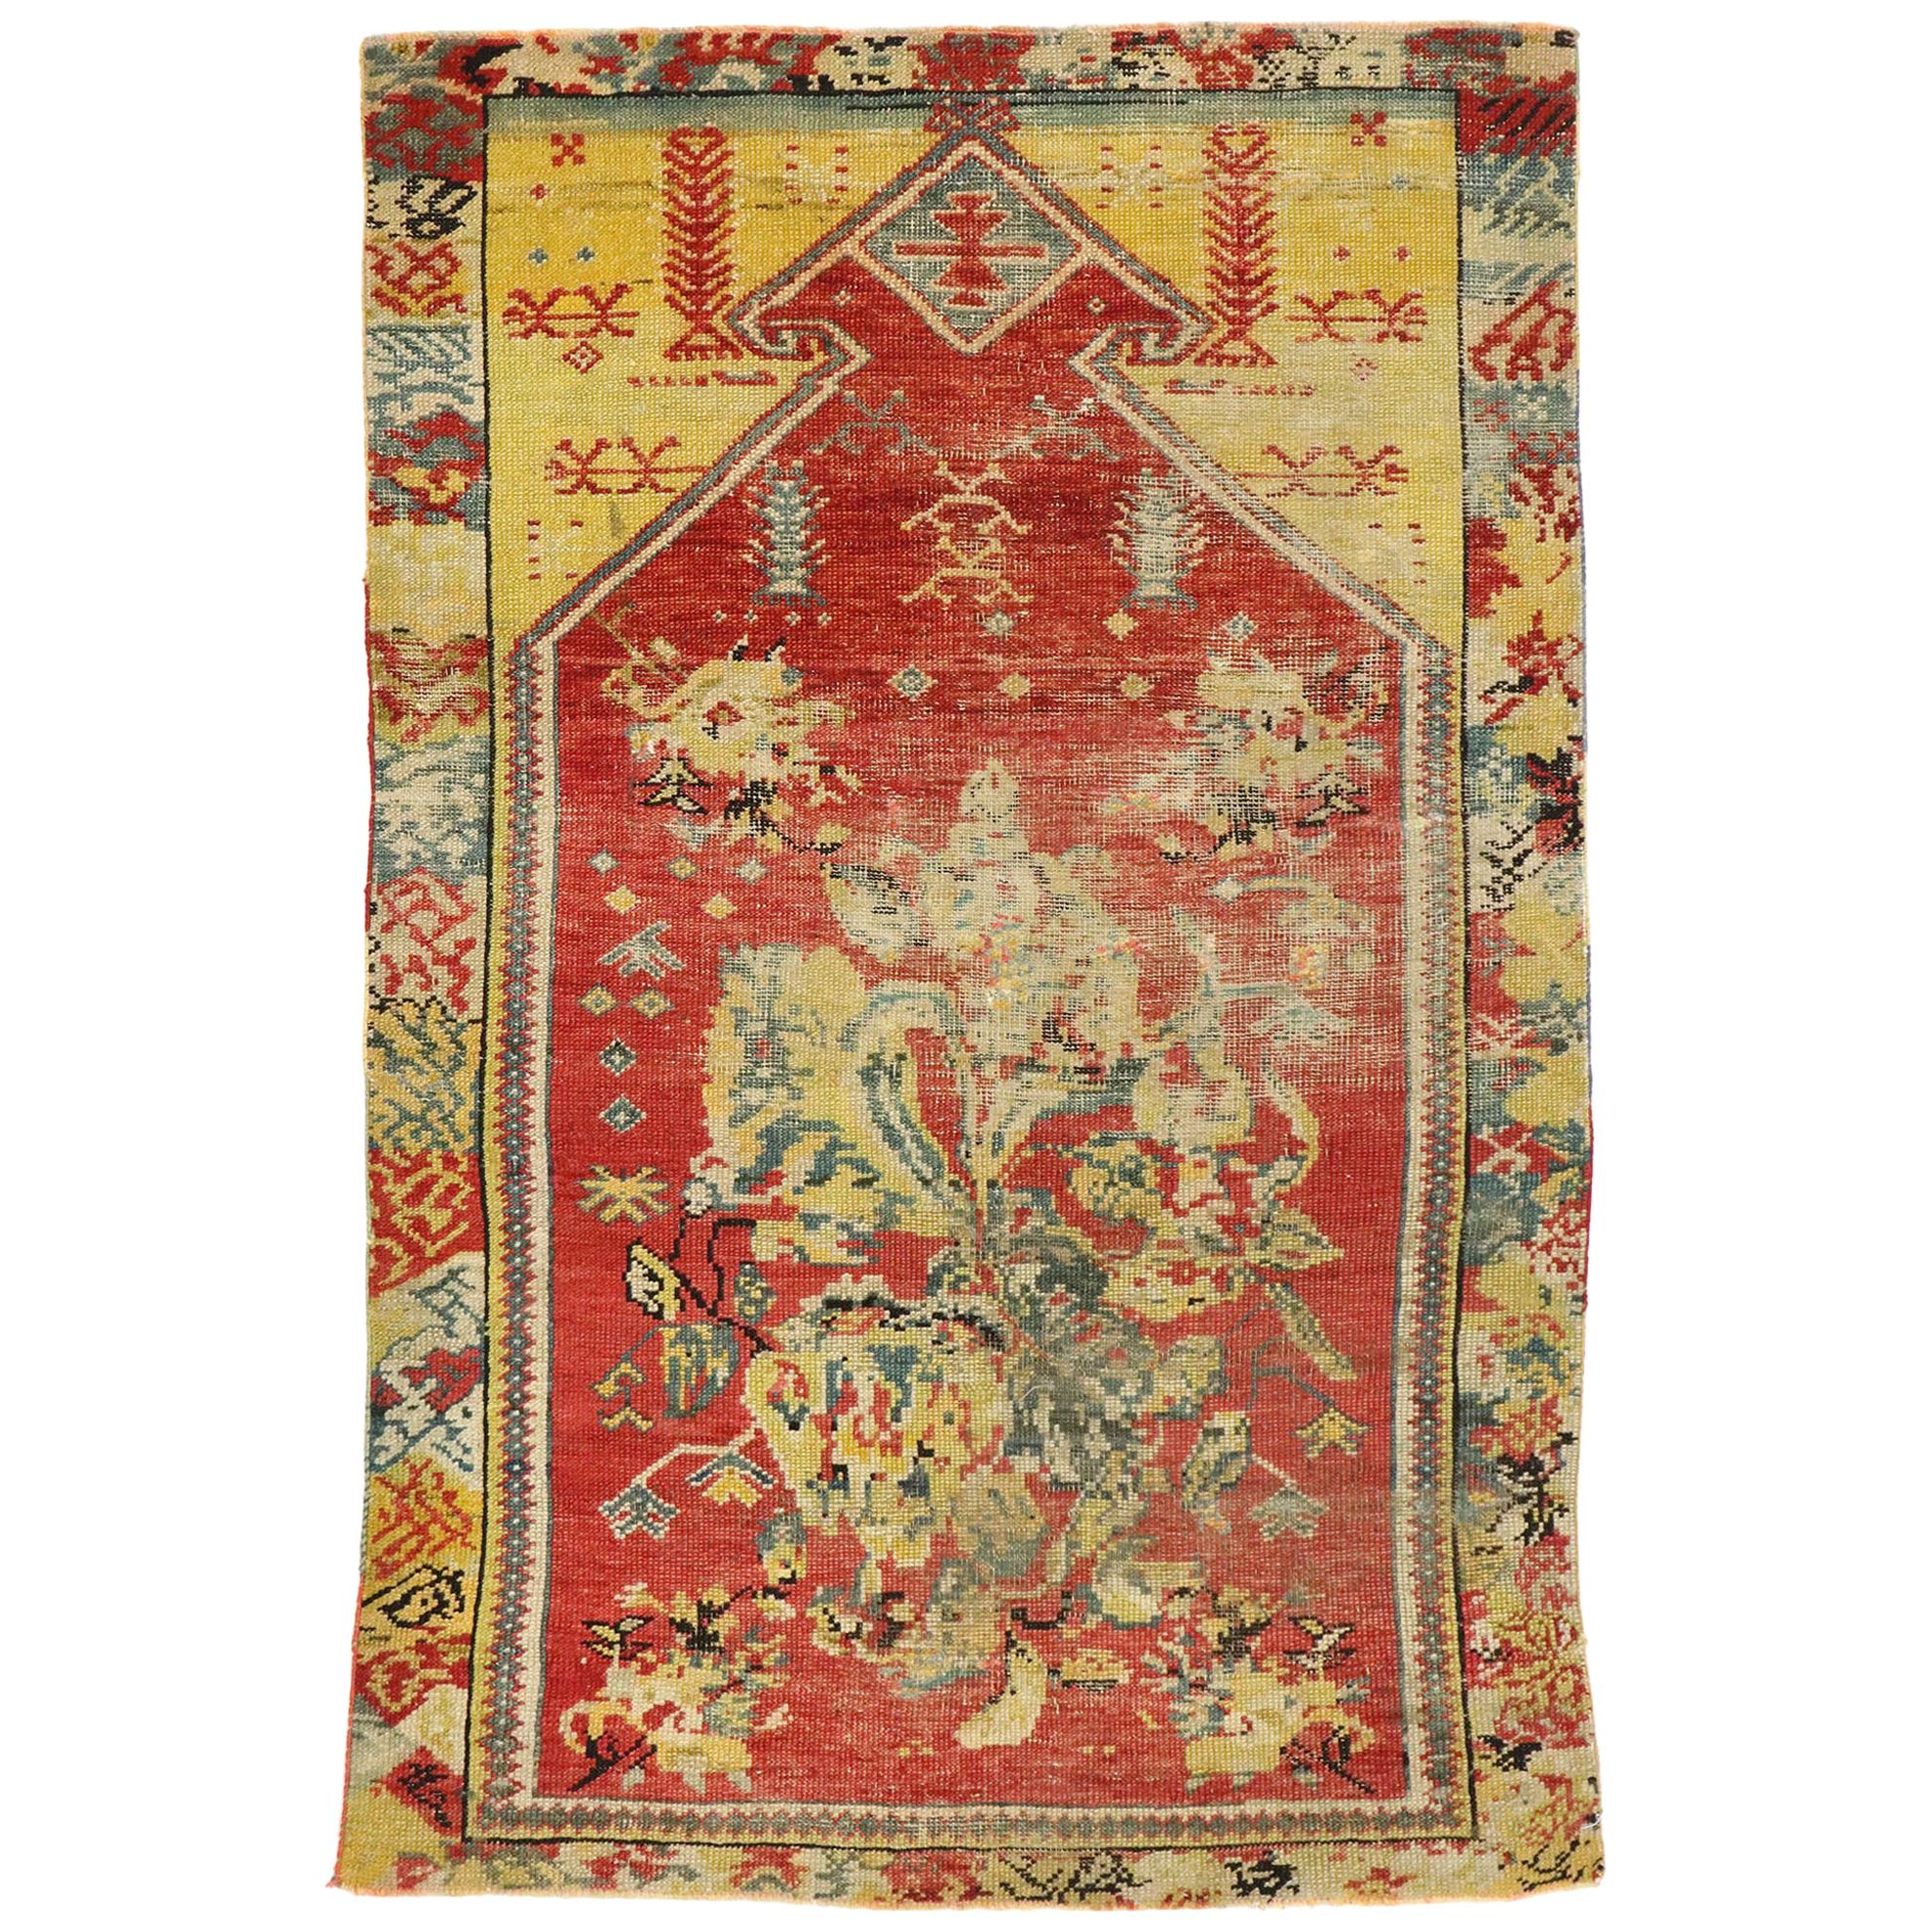 Distressed Antique Turkish Oushak Prayer Rug with Rustic English Country Style